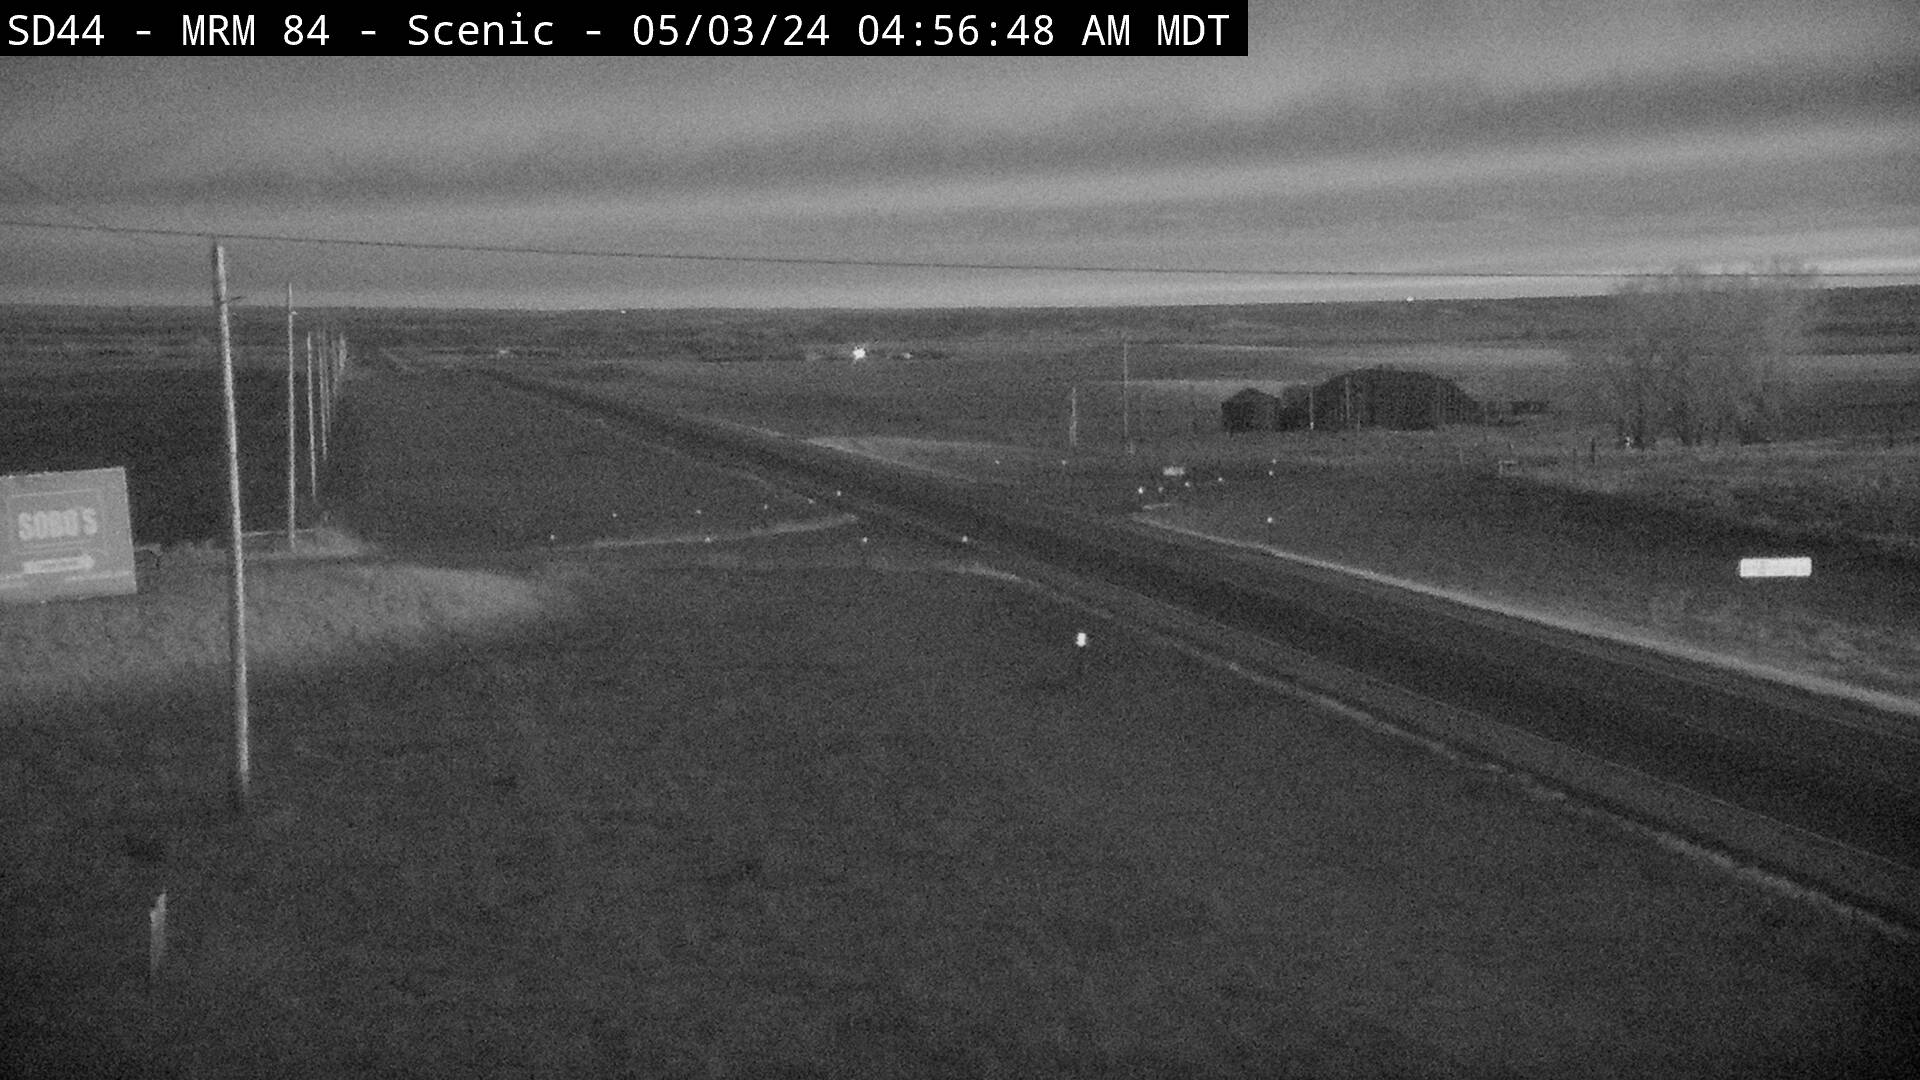 Traffic Cam 2 miles west of town along SD-44 @ MP 84 - West Player